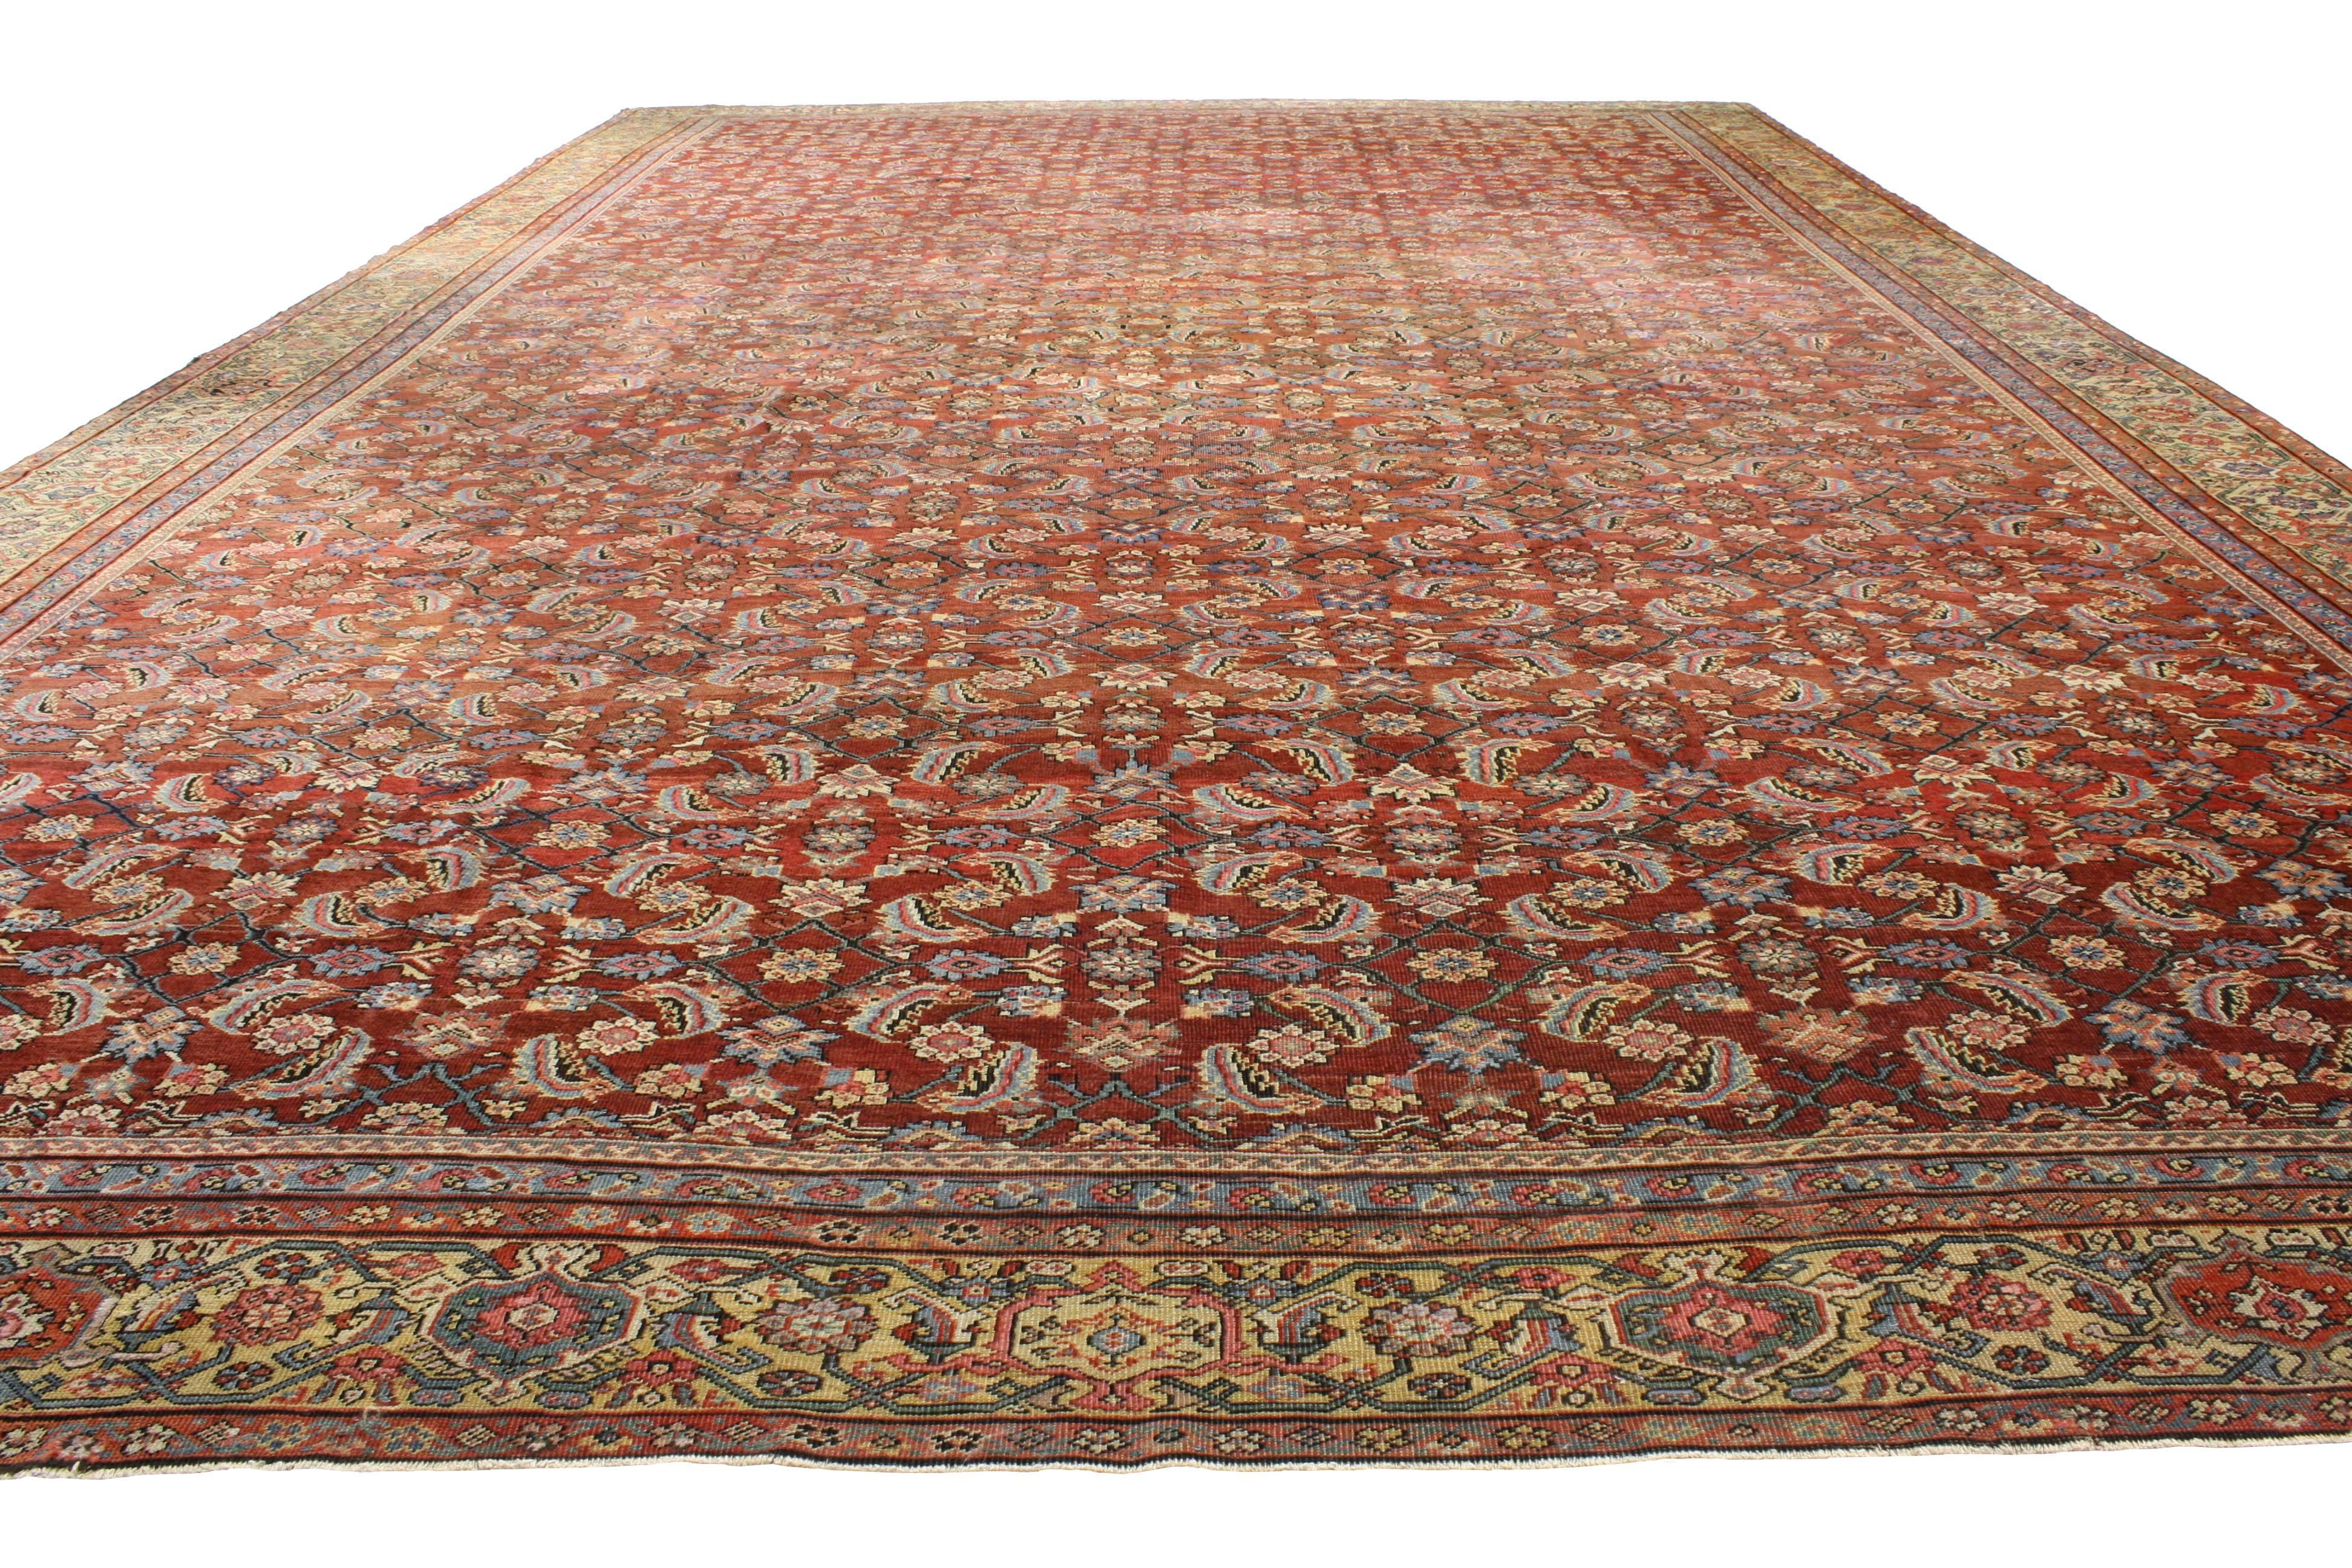 76763 Antique Persian Farahan Mansion Rug with Jacobean Style, Palace Size Persian Rug 16'00 x 25'04. Sophisticated and full of character, this late 19th century antique Persian Farahan rug combines traditional character with modern style. With its